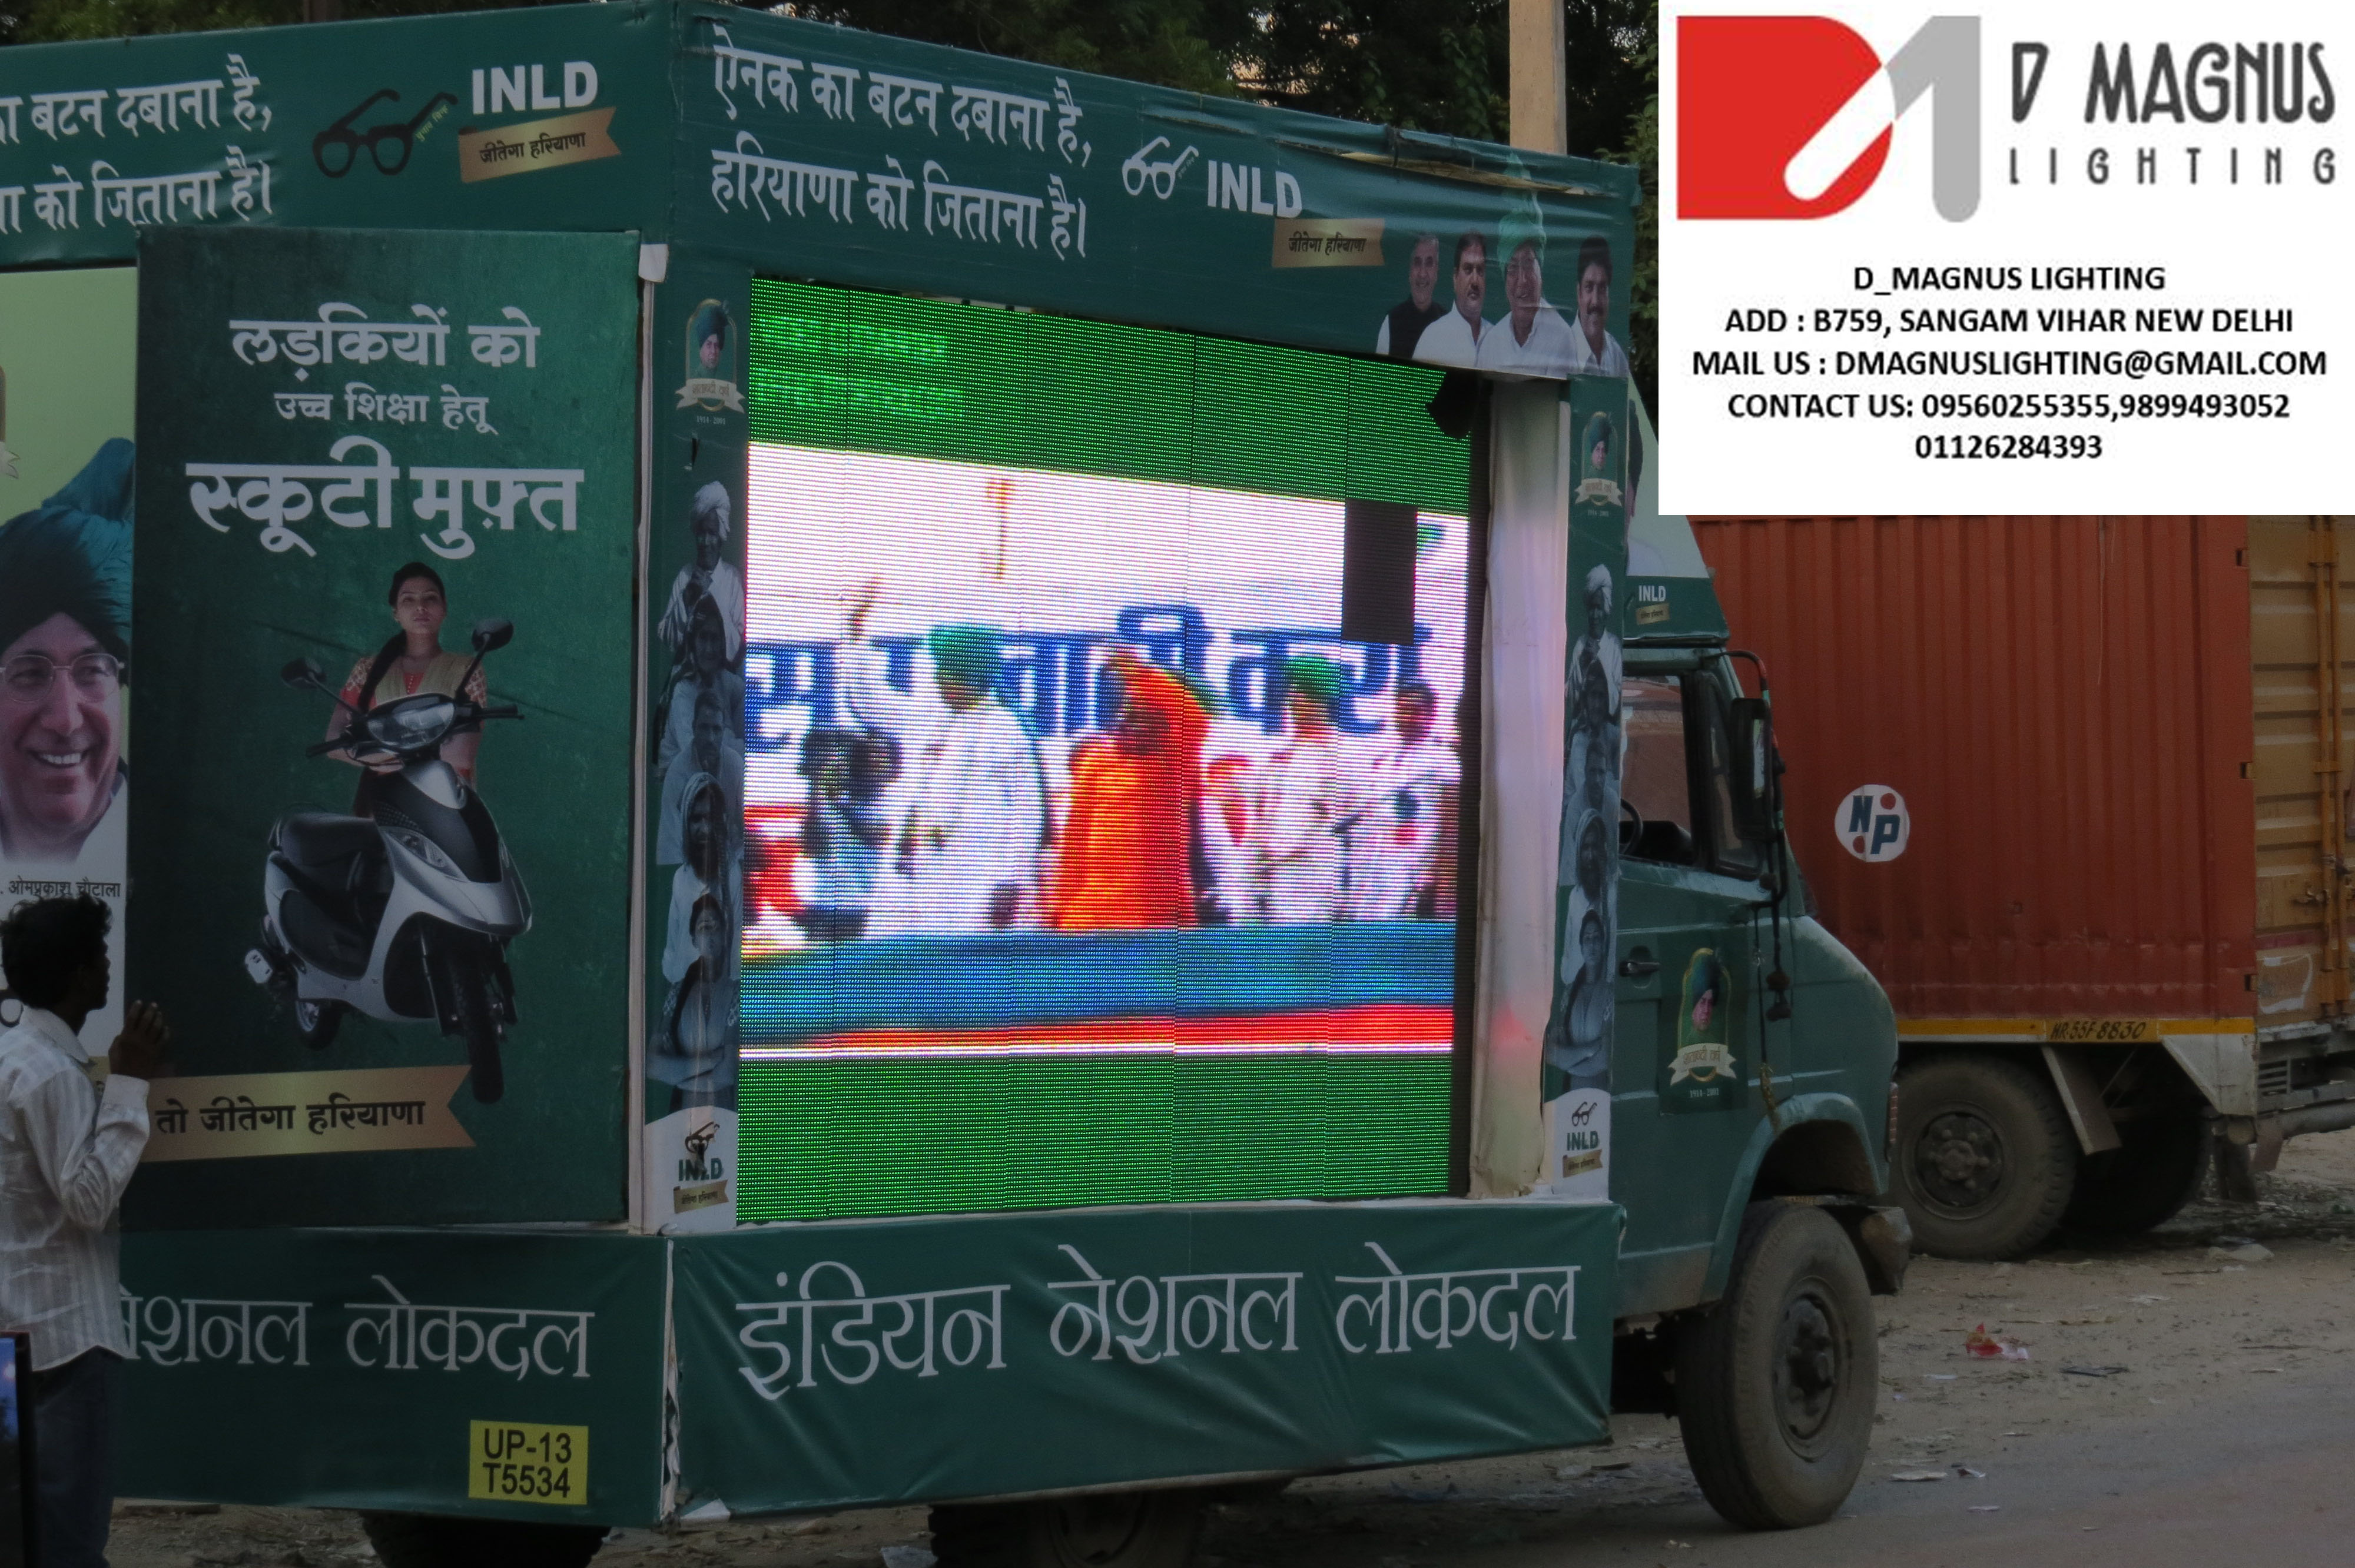 Mobile van advertising on rent in GujaratEventsExhibitions - Trade FairsSouth DelhiEast of Kailash